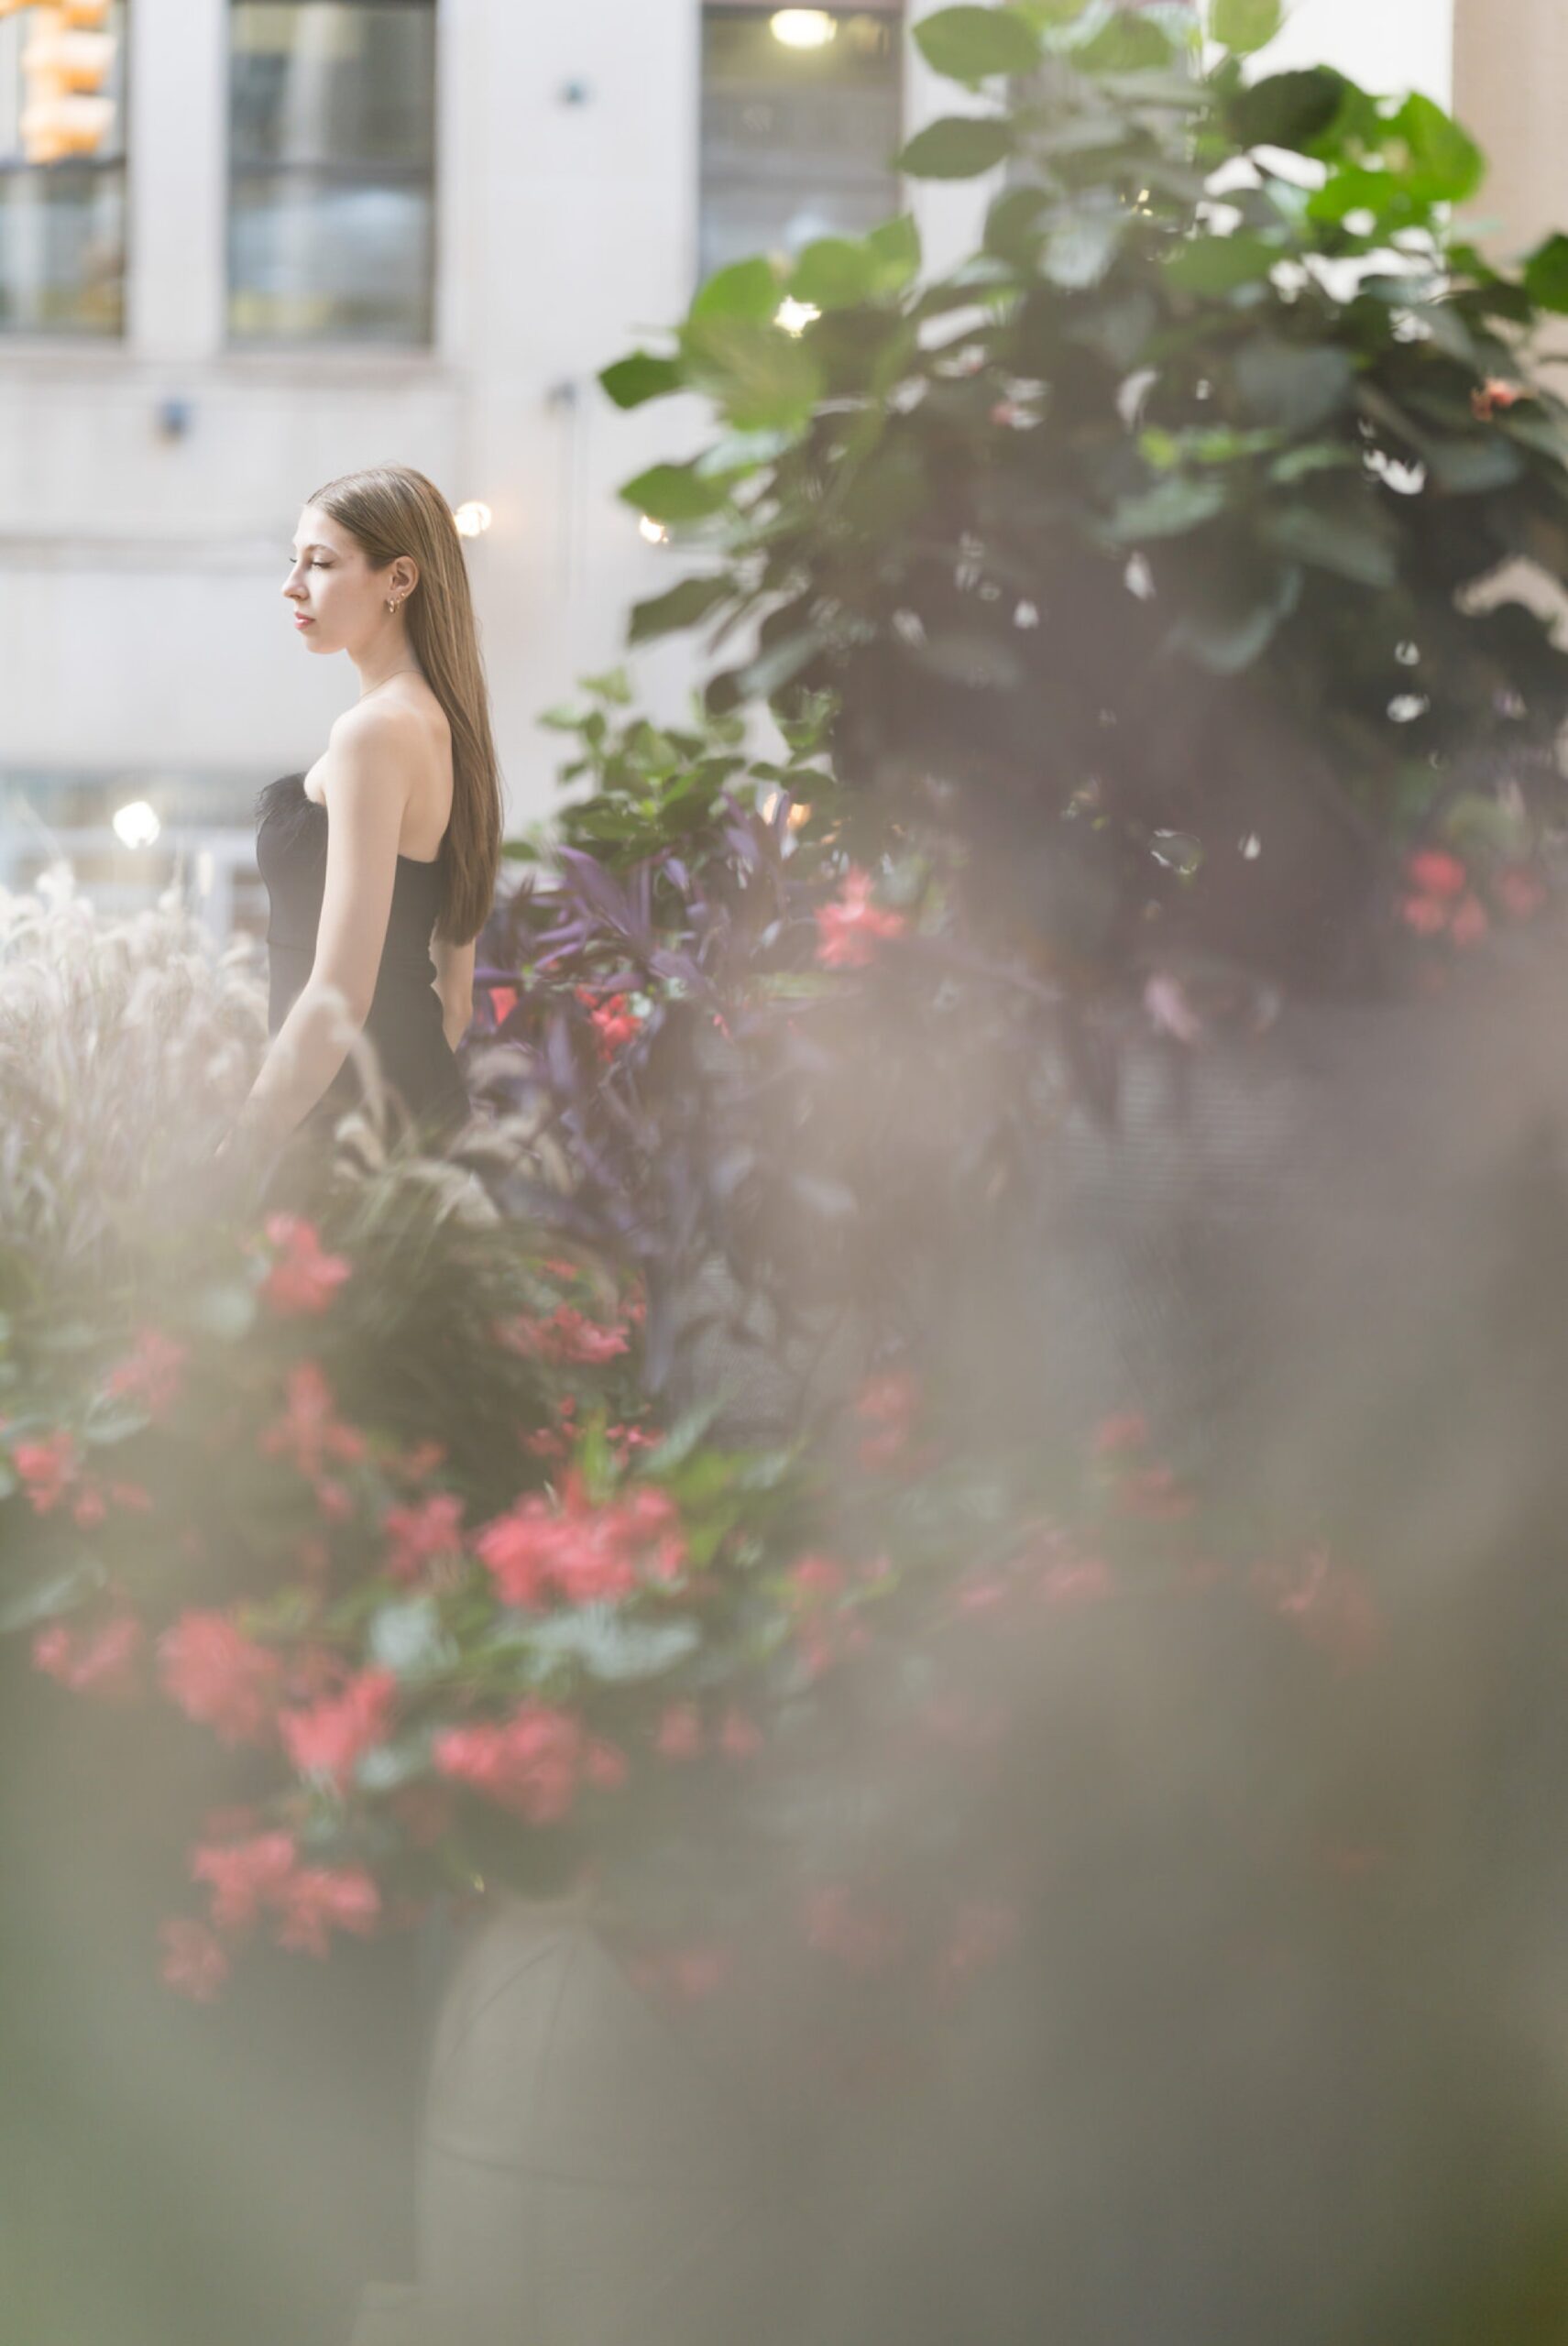 A woman wearing a black dress and pink heels poses among some greenery for her Detroit senior pictures.  